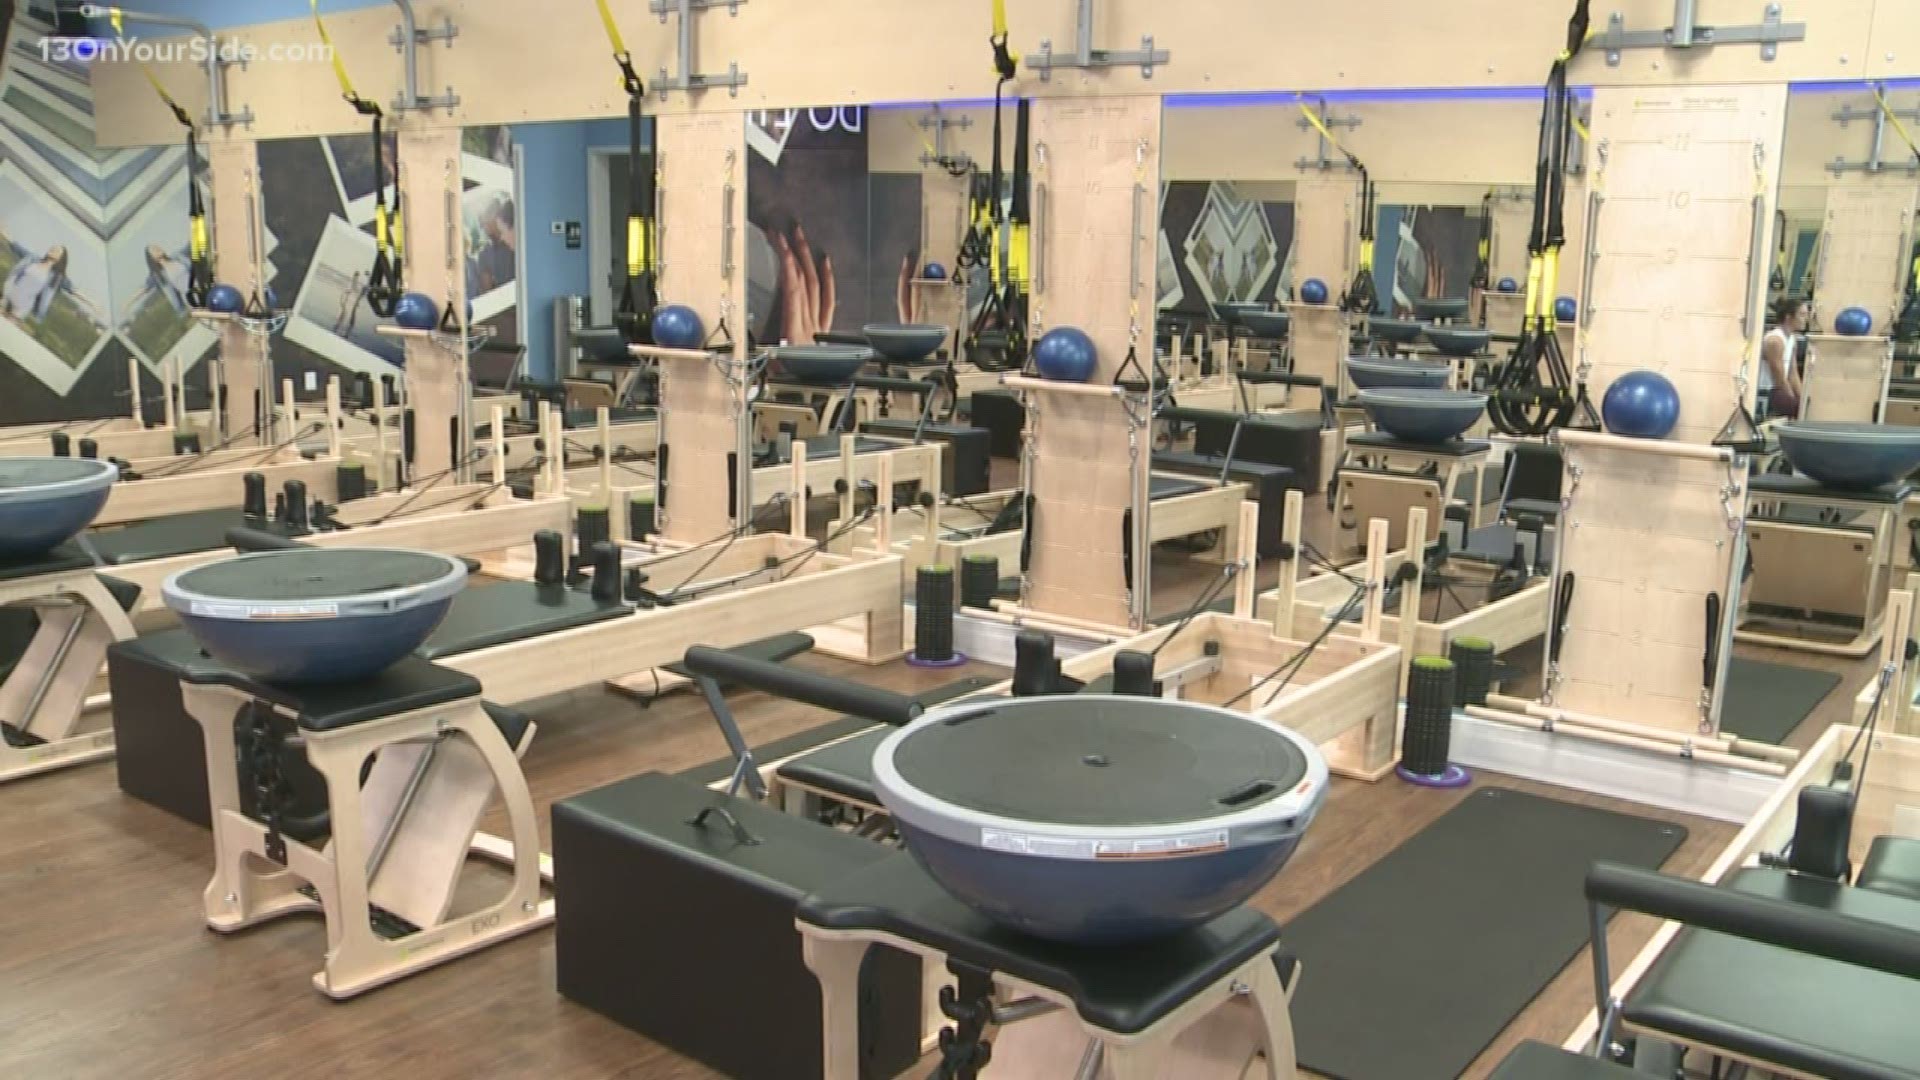 The family owned Club Pilates in Breton Village offers more than just low-impact, full-body workouts. Owner Kim Stuk and her two daughters started the Club Pilates Breton Village to give locals an awesome experience to partake in pilates.